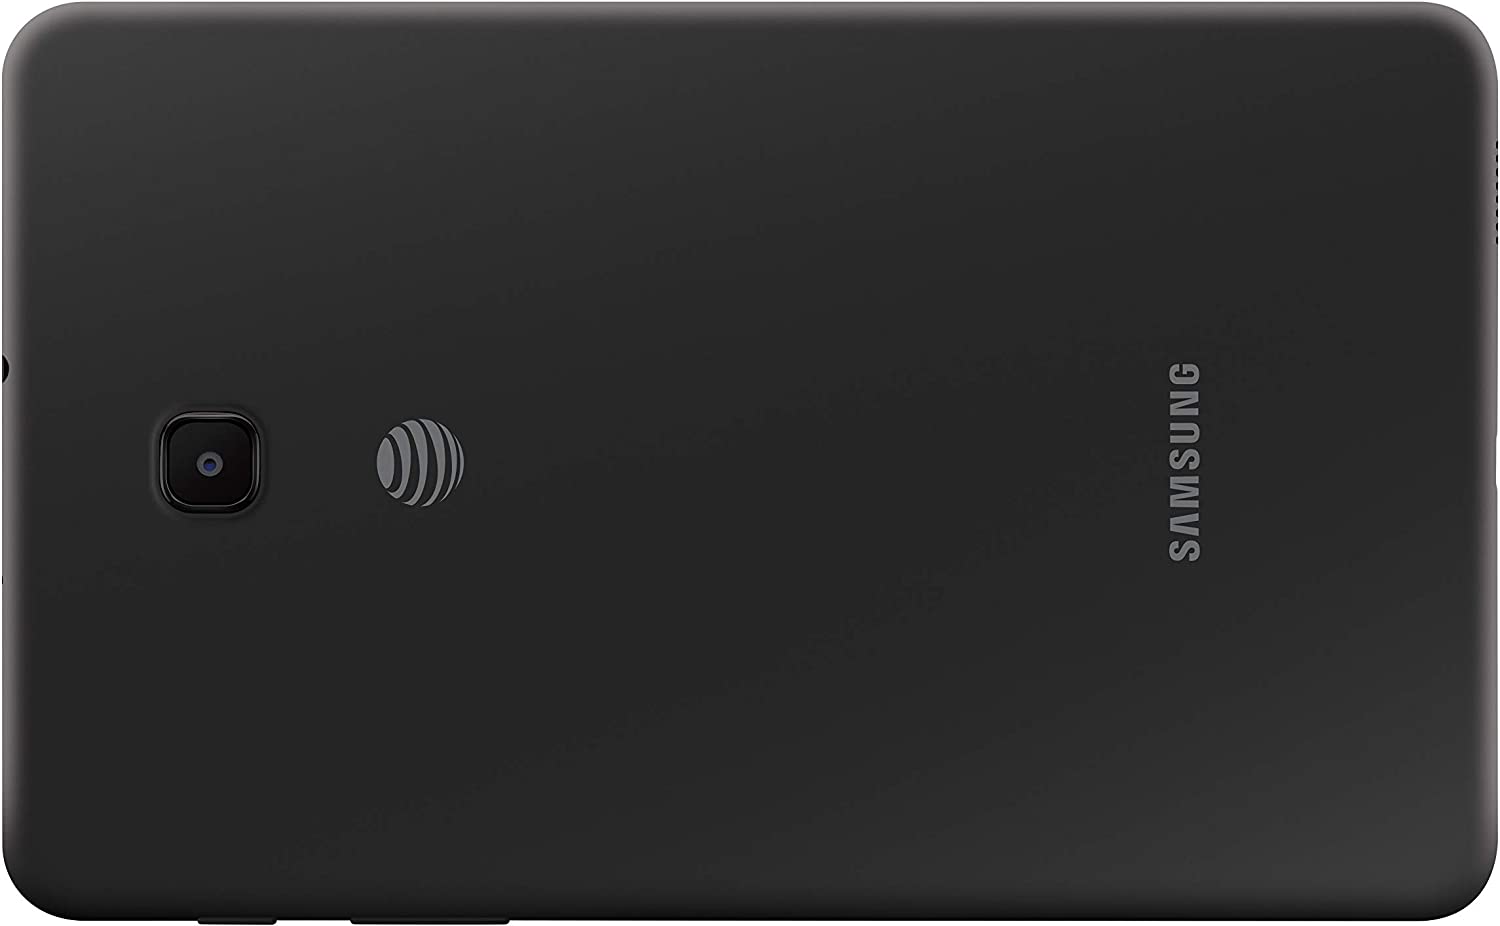 Samsung SM-T387VZKAVZW-RBC 8.0" Galaxy Tab A 32GB Wifi 4G LTE Android Tablet Black - Certified Refurbished